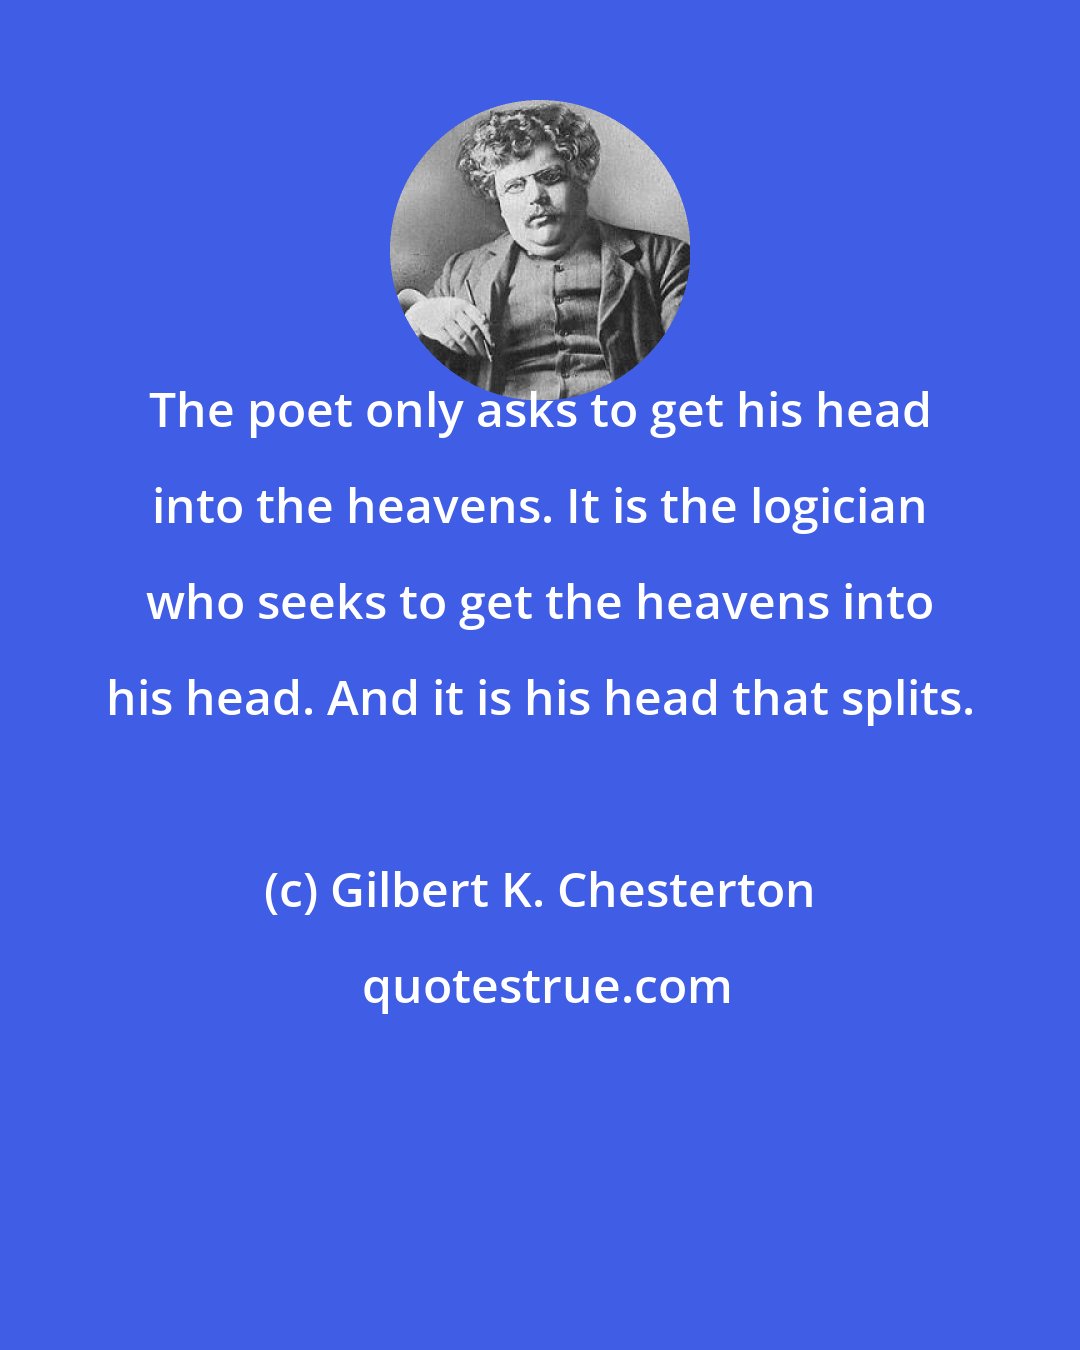 Gilbert K. Chesterton: The poet only asks to get his head into the heavens. It is the logician who seeks to get the heavens into his head. And it is his head that splits.